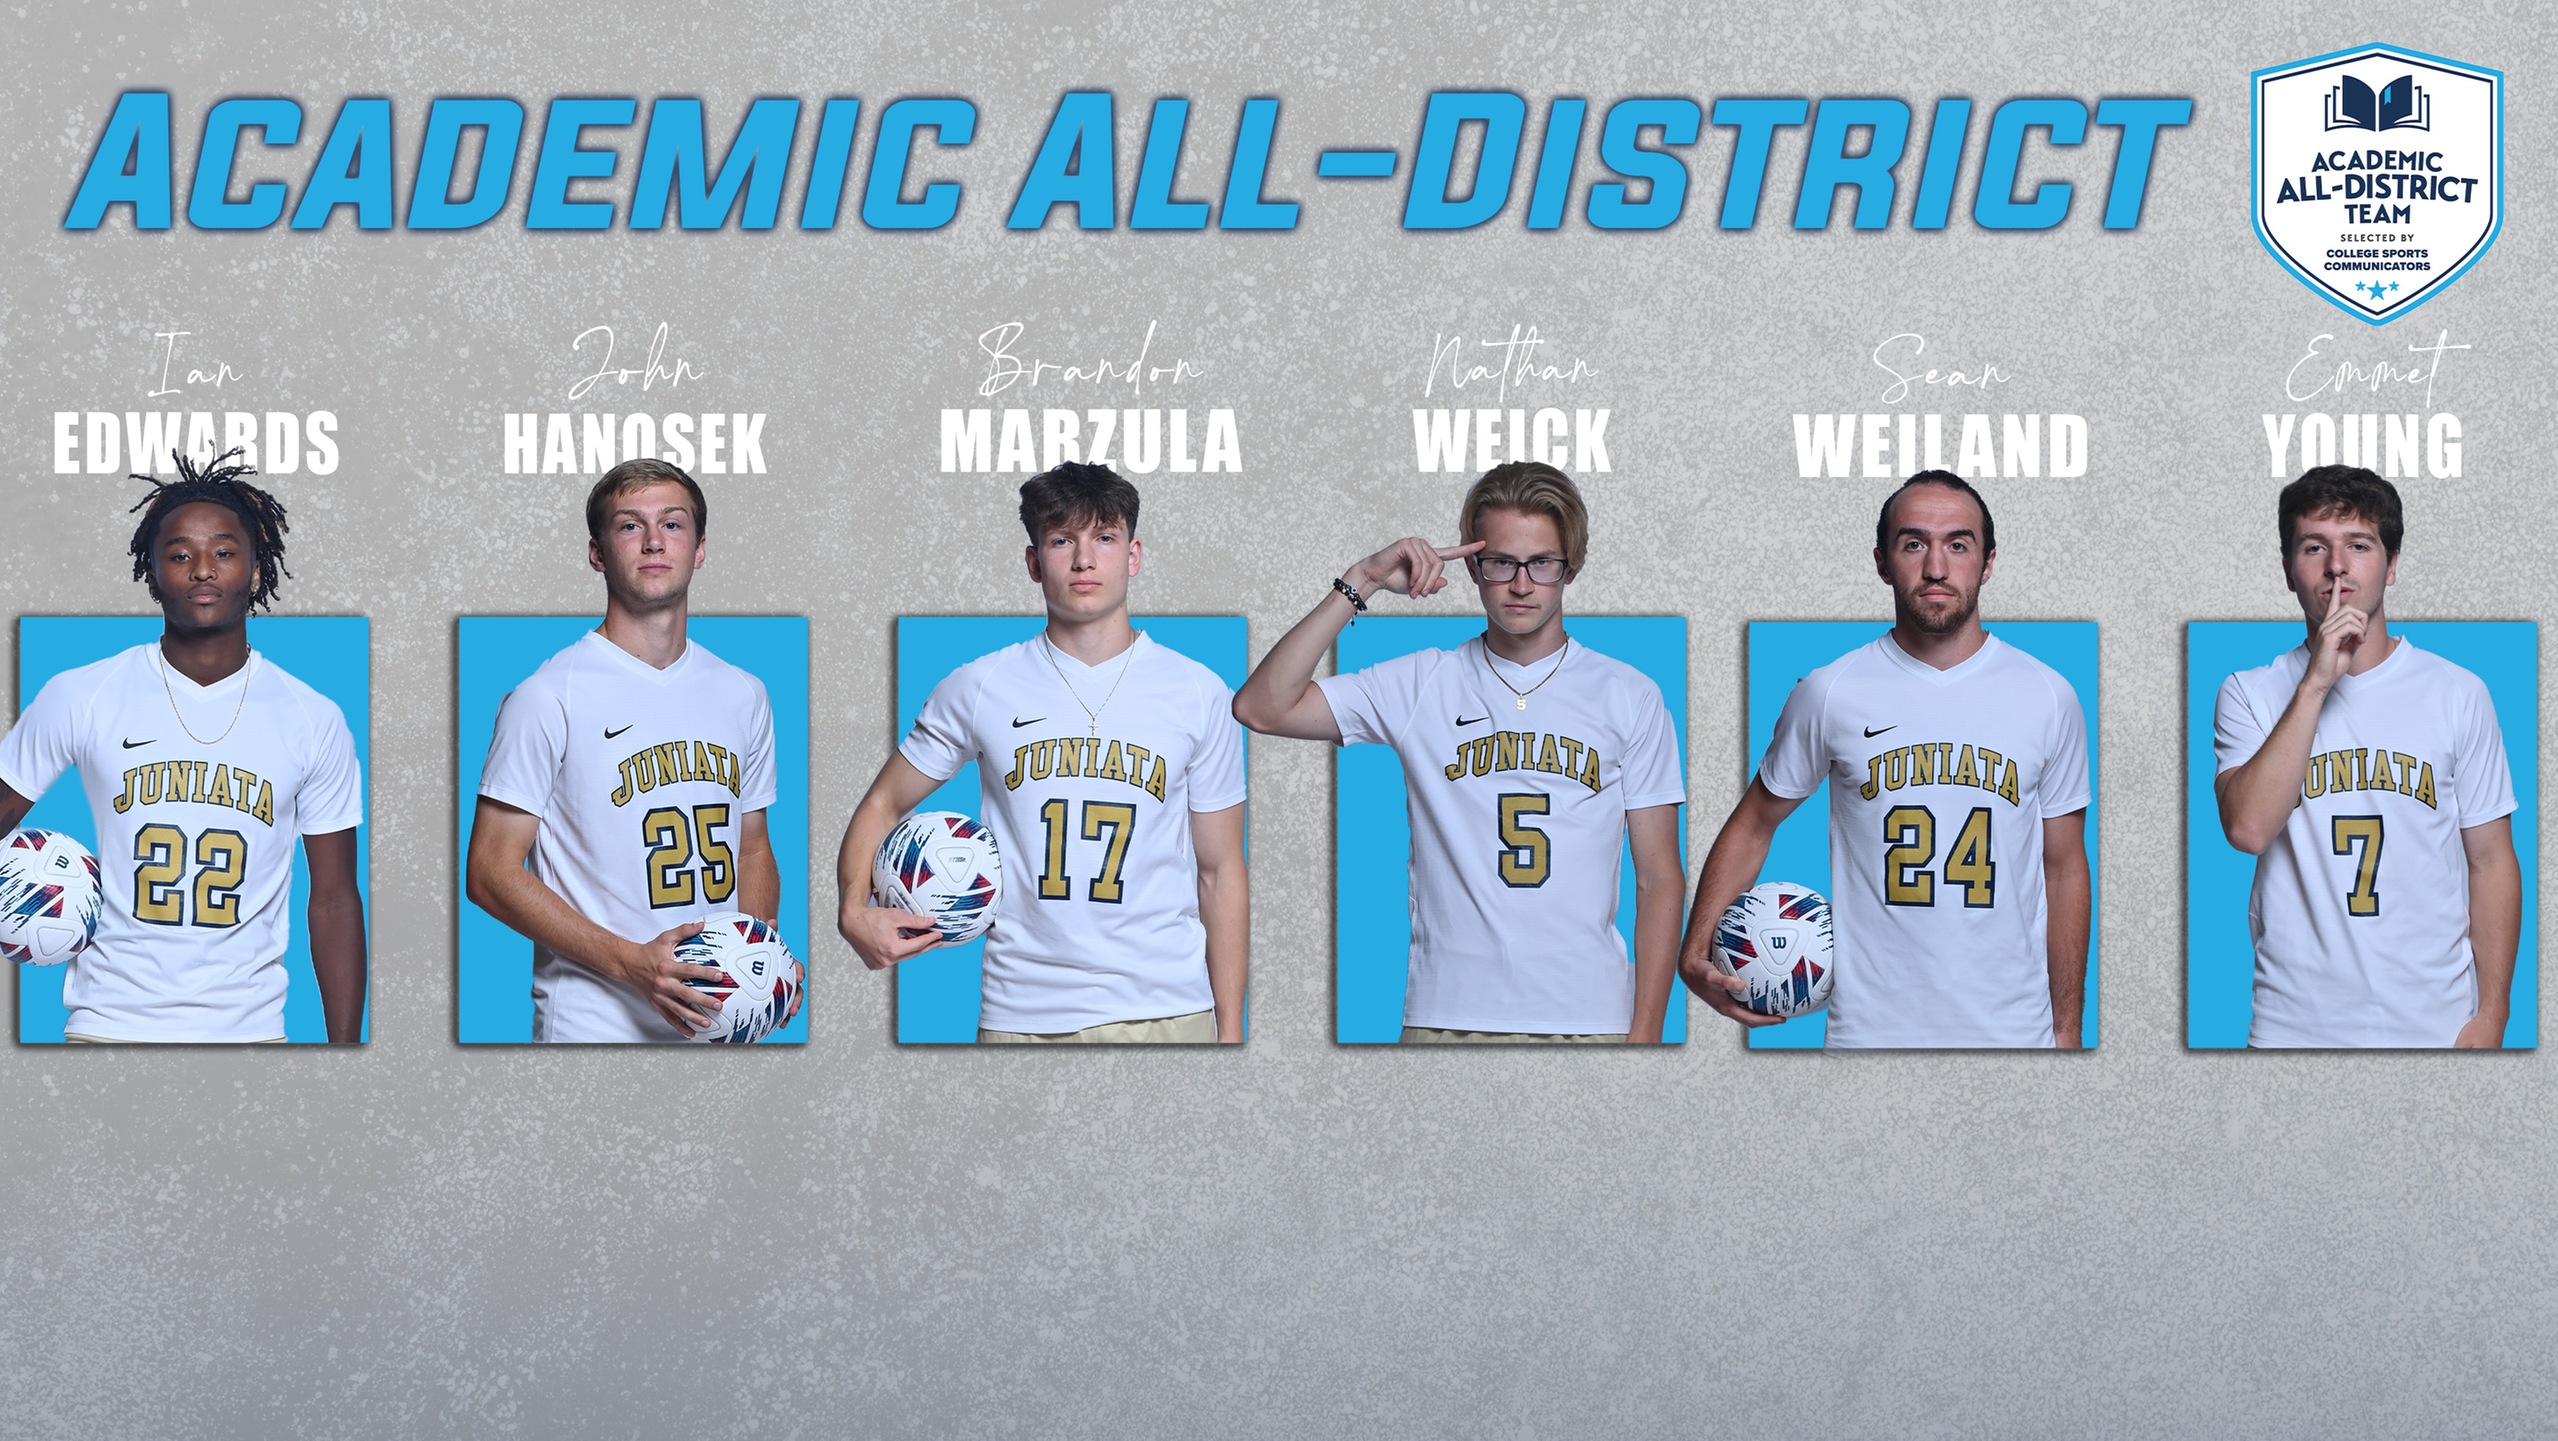 Six Eagles Named to CSC Academic All-District&reg; Men's Soccer Team